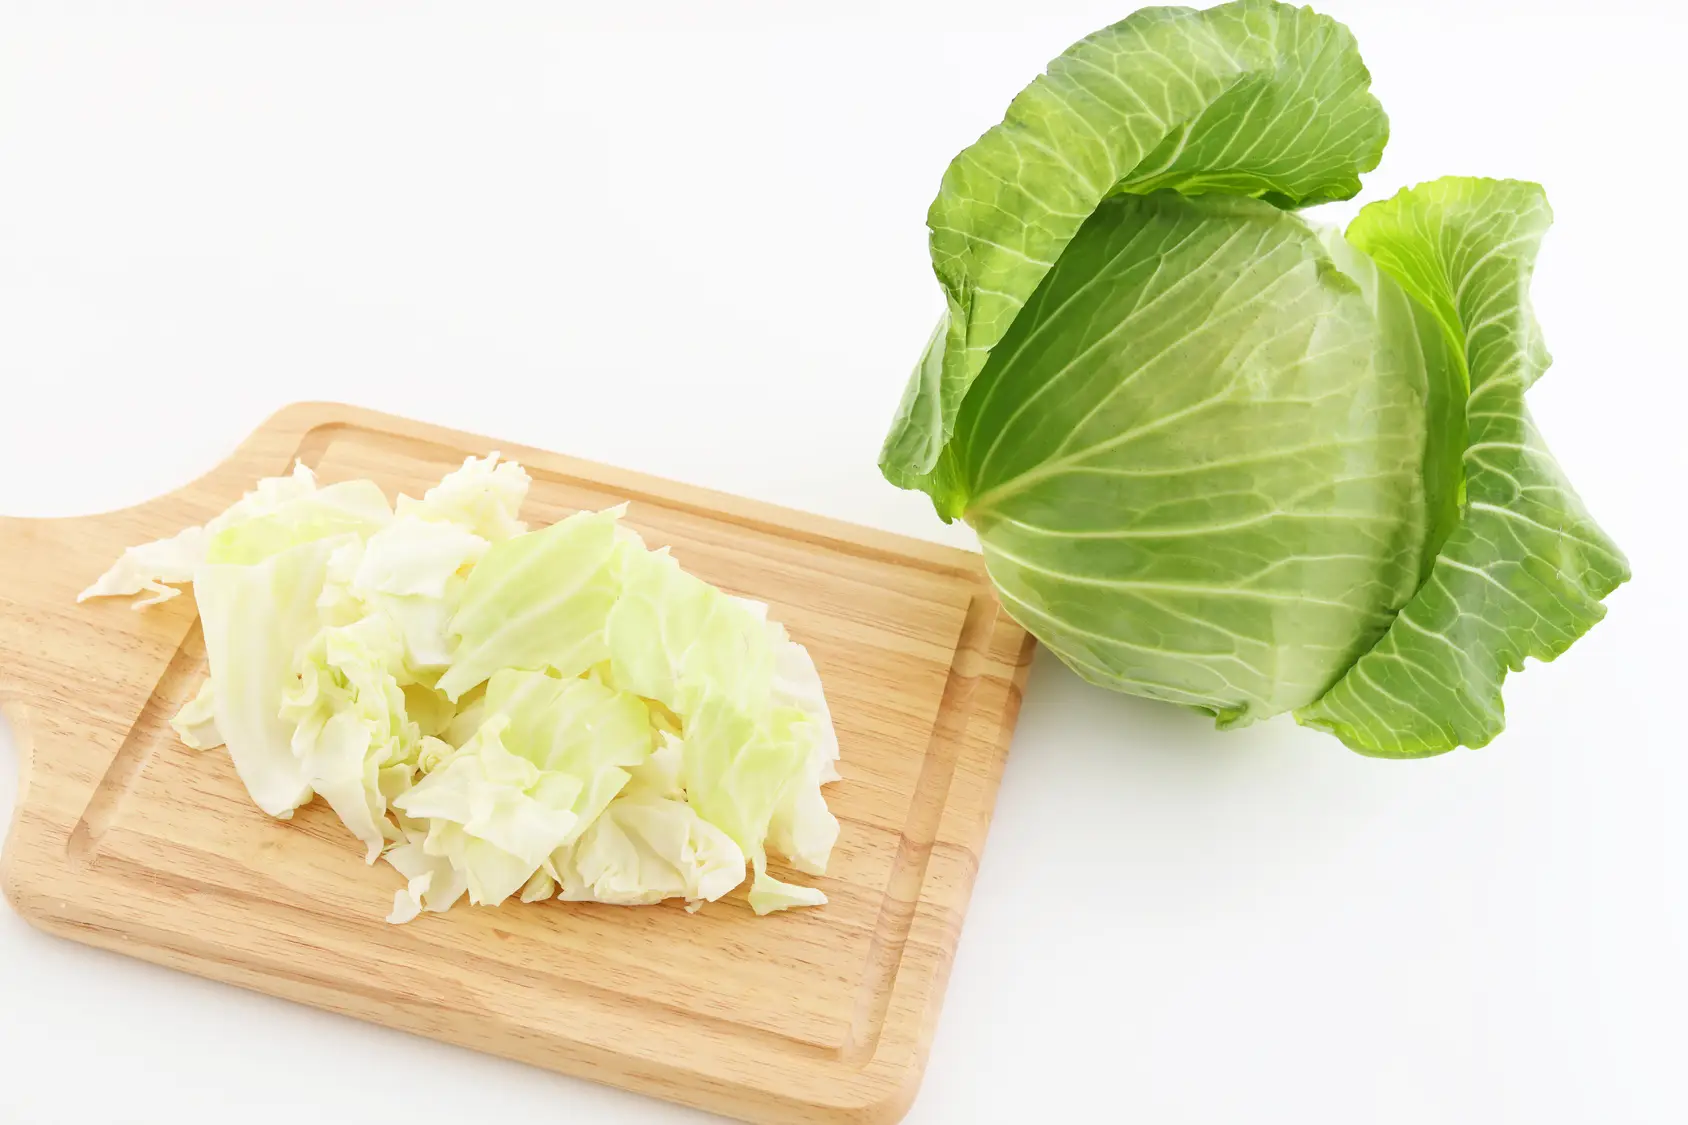 How to freeze cabbage